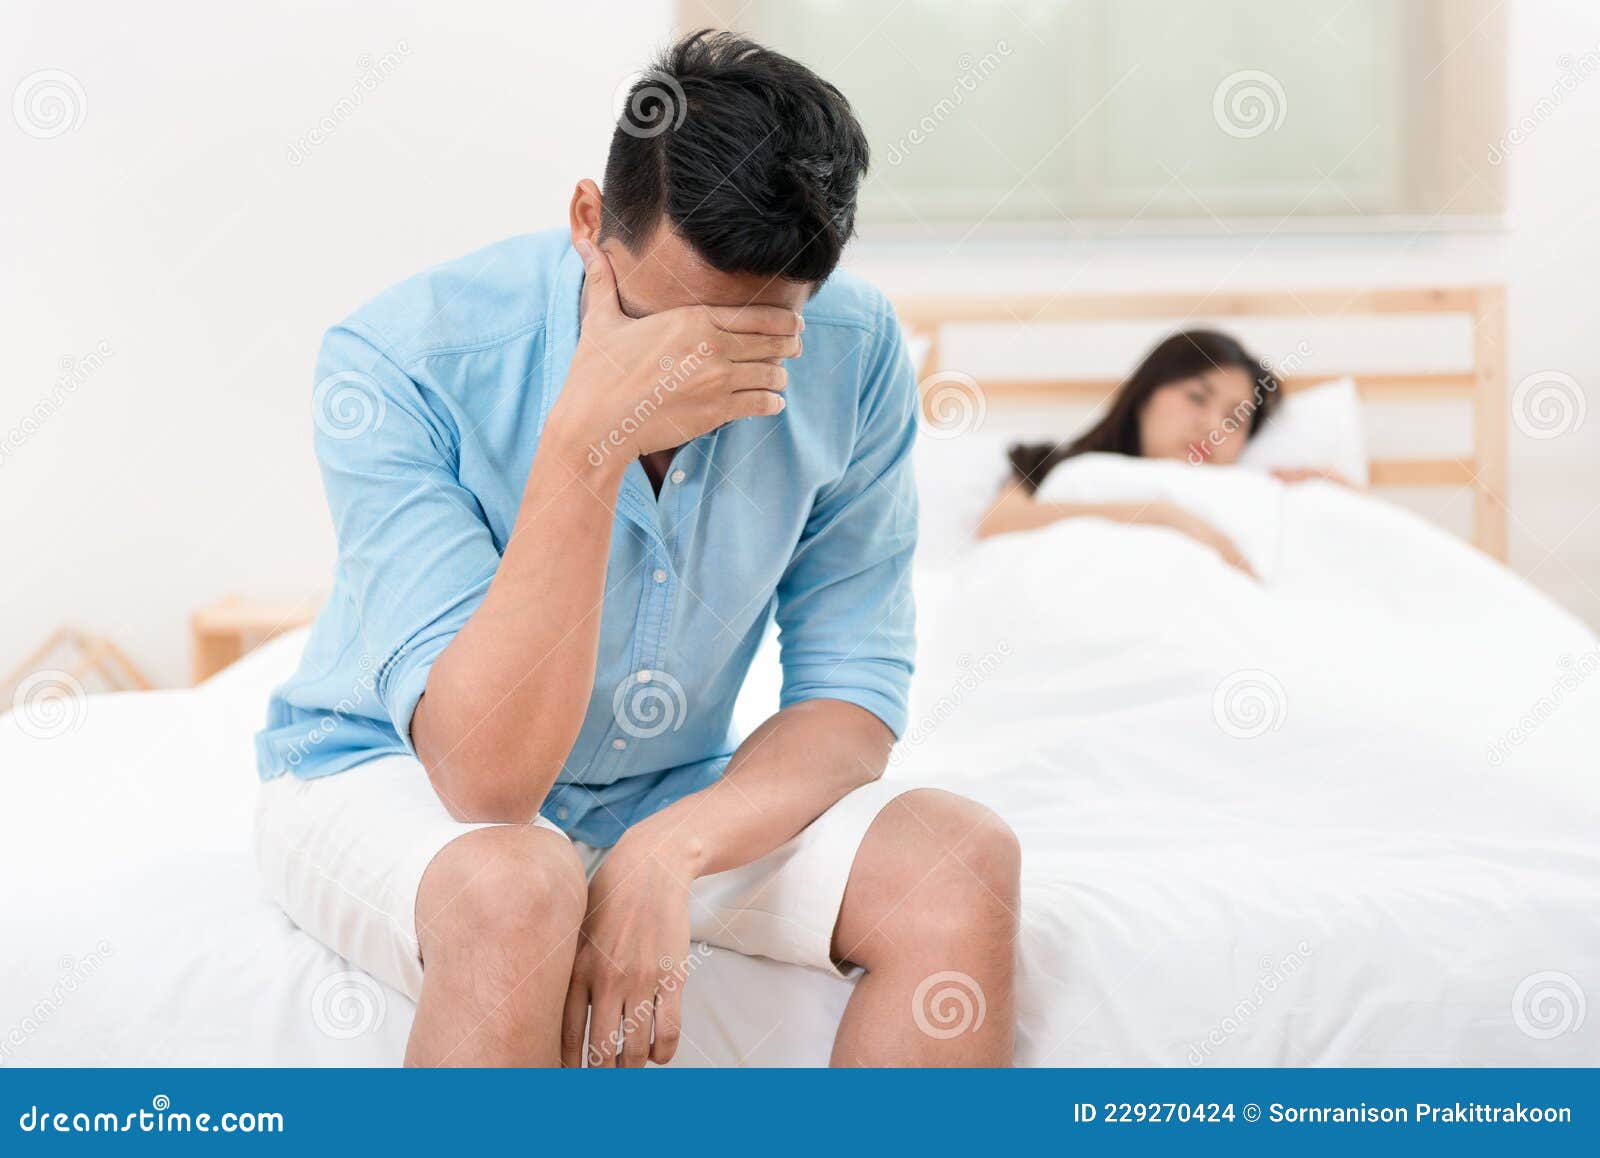 husband unhappy and disappointed